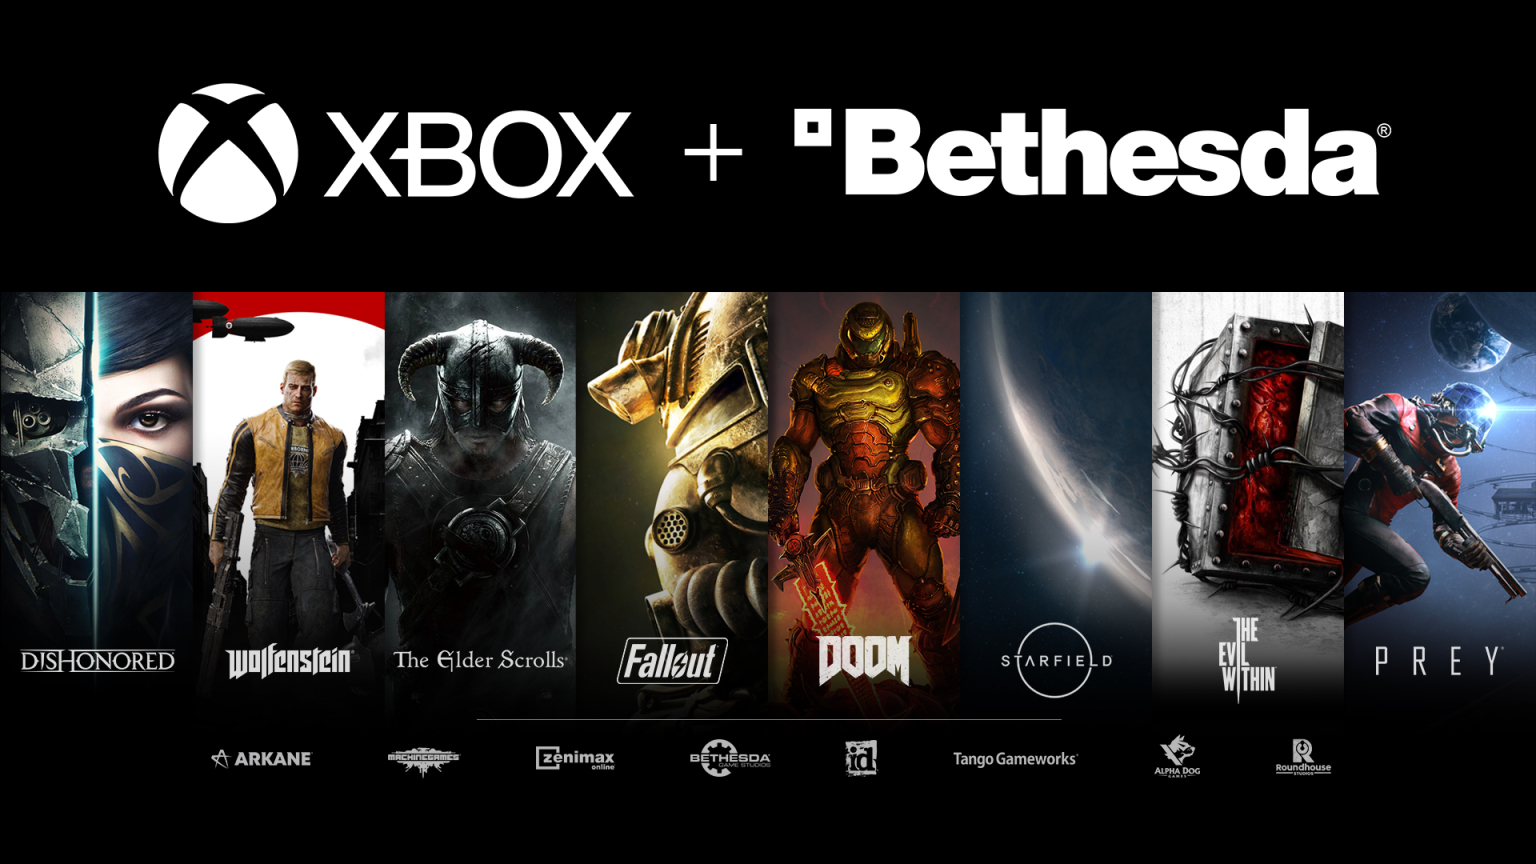 Microsoft acquires ZeniMax Media, parent company of Bethesda Softworks